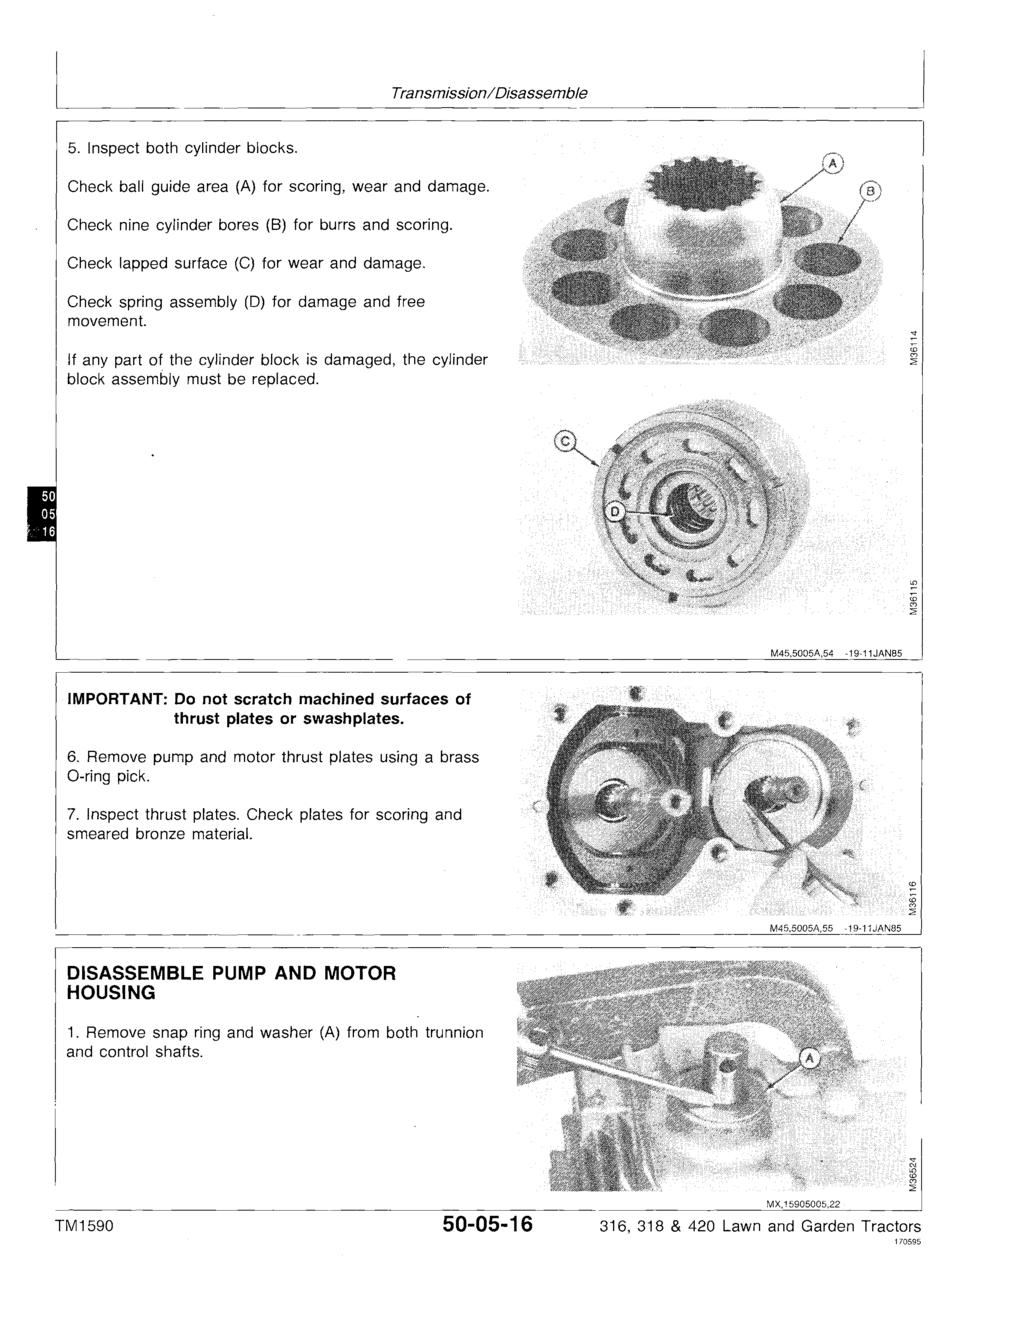 Transmission/Disassemble 5. Inspect both cylinder blocks. Check ball guide area (A) for scoring, wear and damage. Check nine cylinder bores (8) for burrs and scoring.